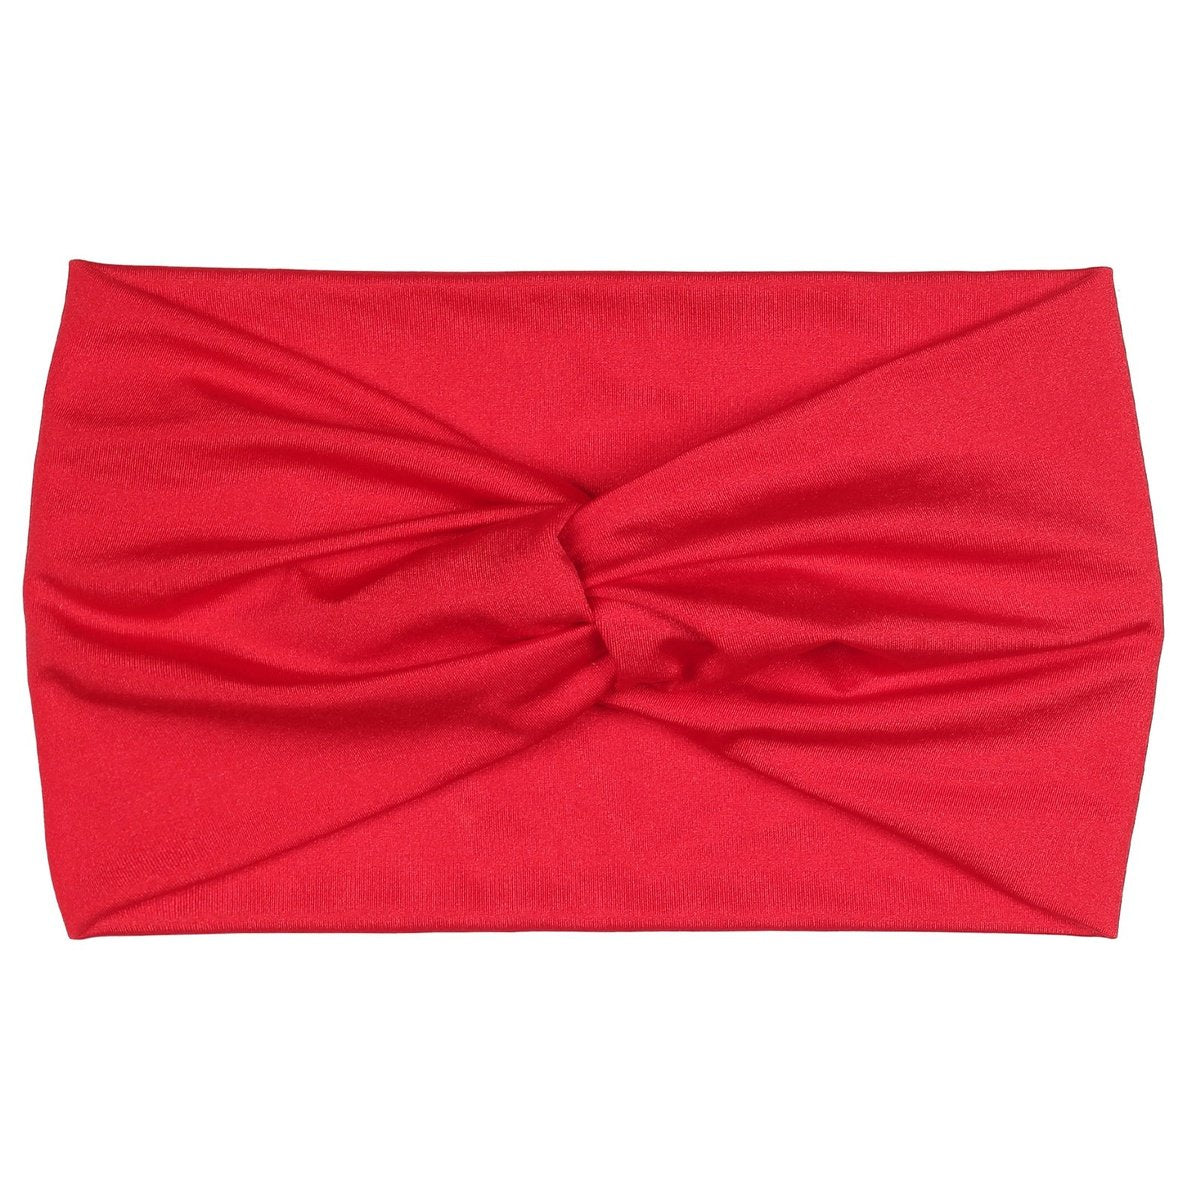 Knotted Lycra Headband - Manetain Store